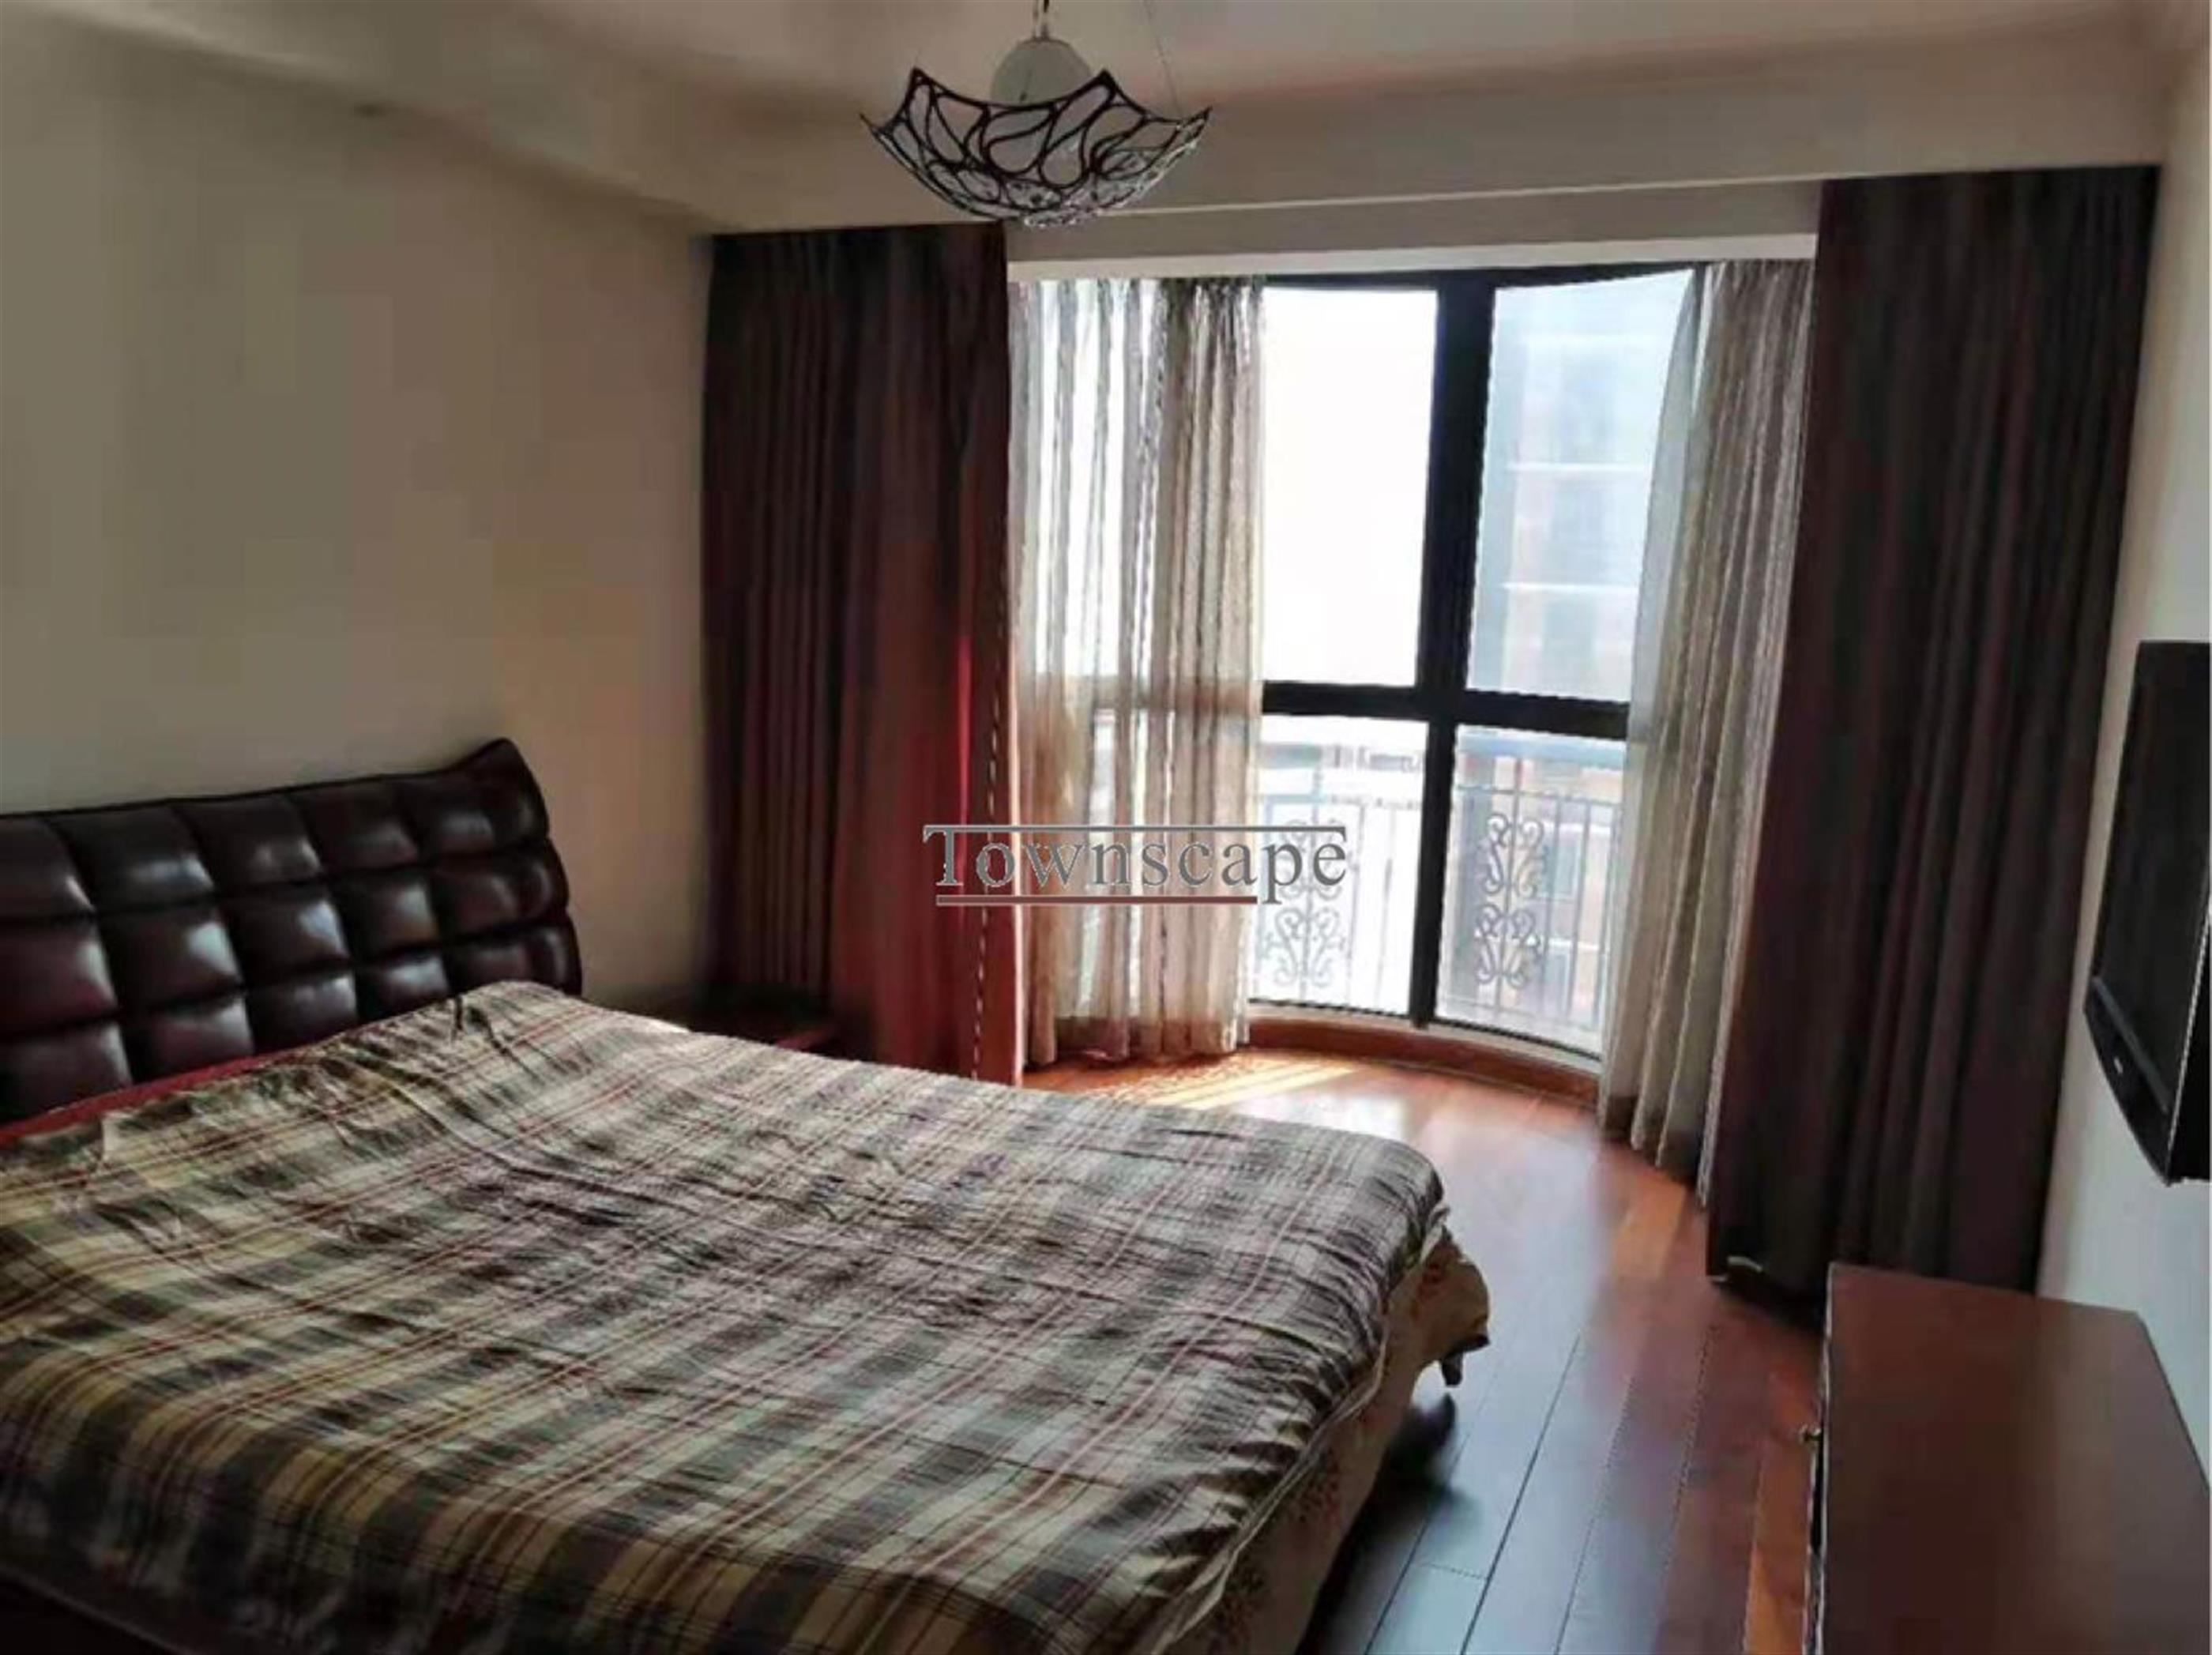 Bright Bedrooms Great Value Spacious Bright 3BR Apartment Near LN 10 & Zoo for Rent in Shanghai